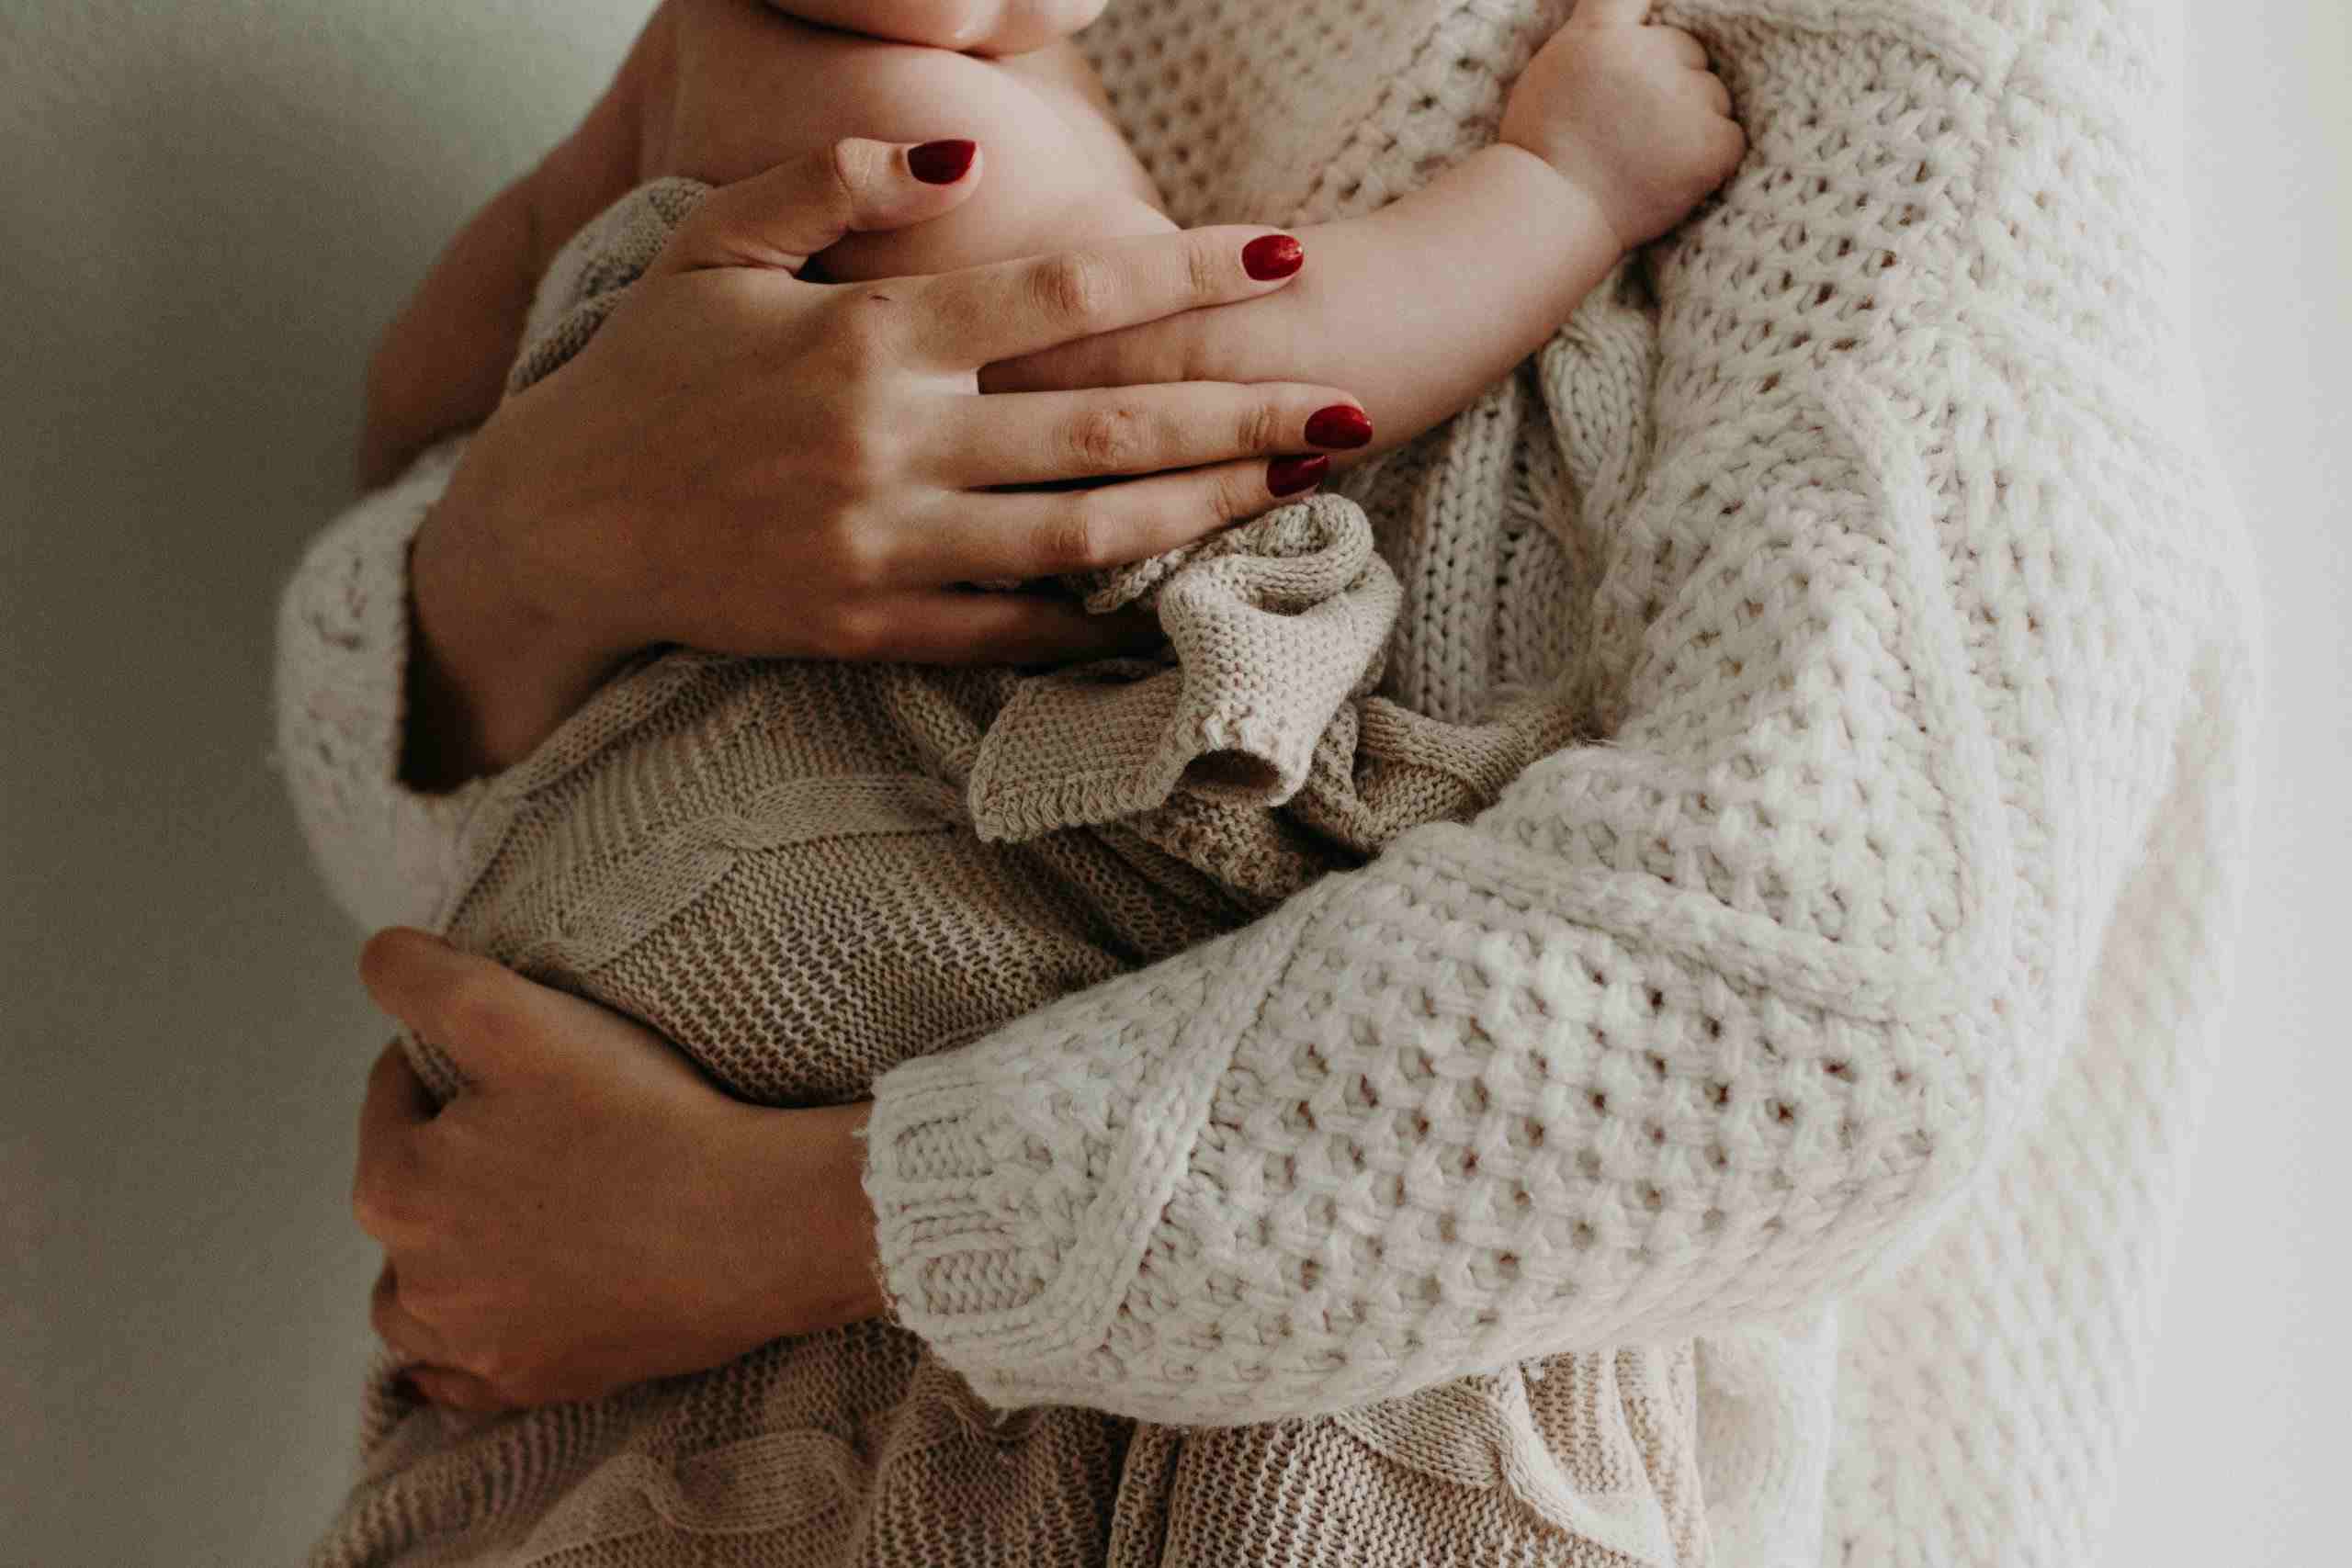 A mother with red nails holding her newborn baby in biege clothing.